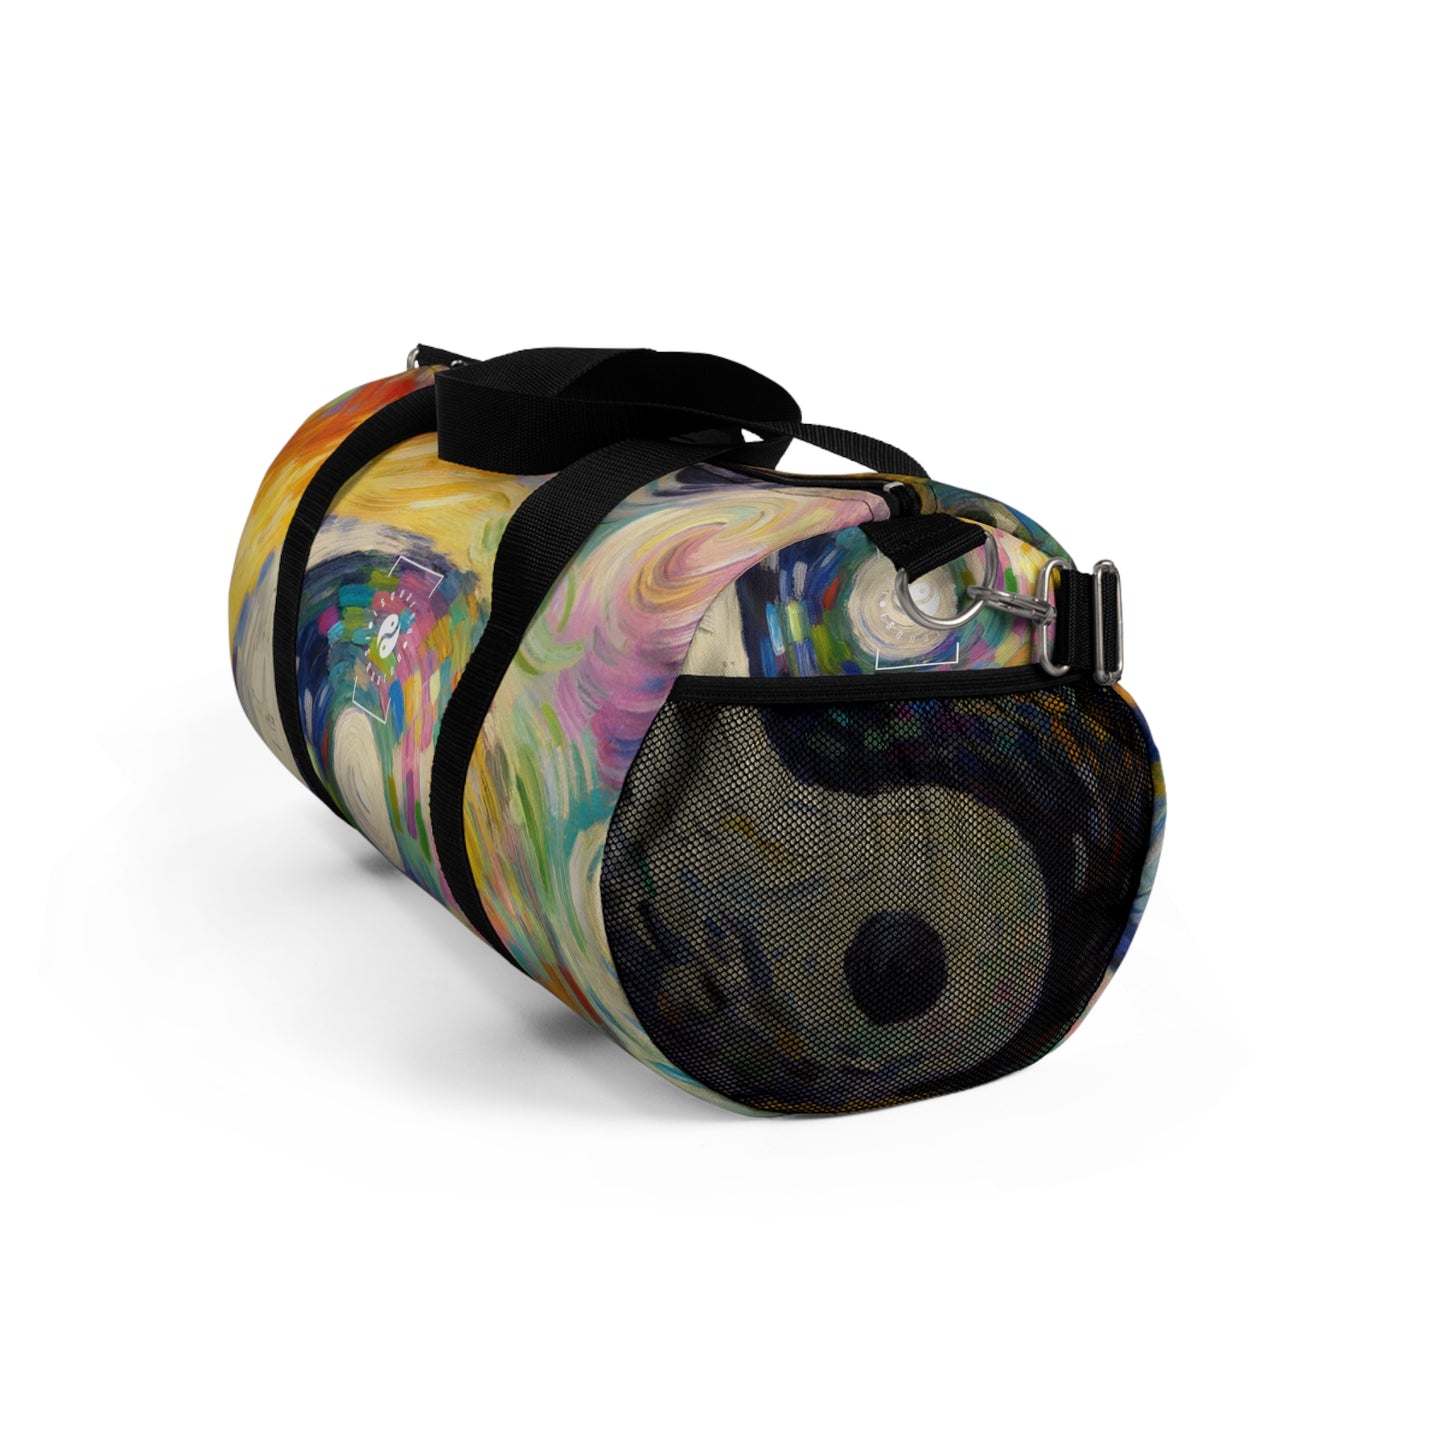 "Spectral Duality: An Impressionist Balance" - Duffle Bag